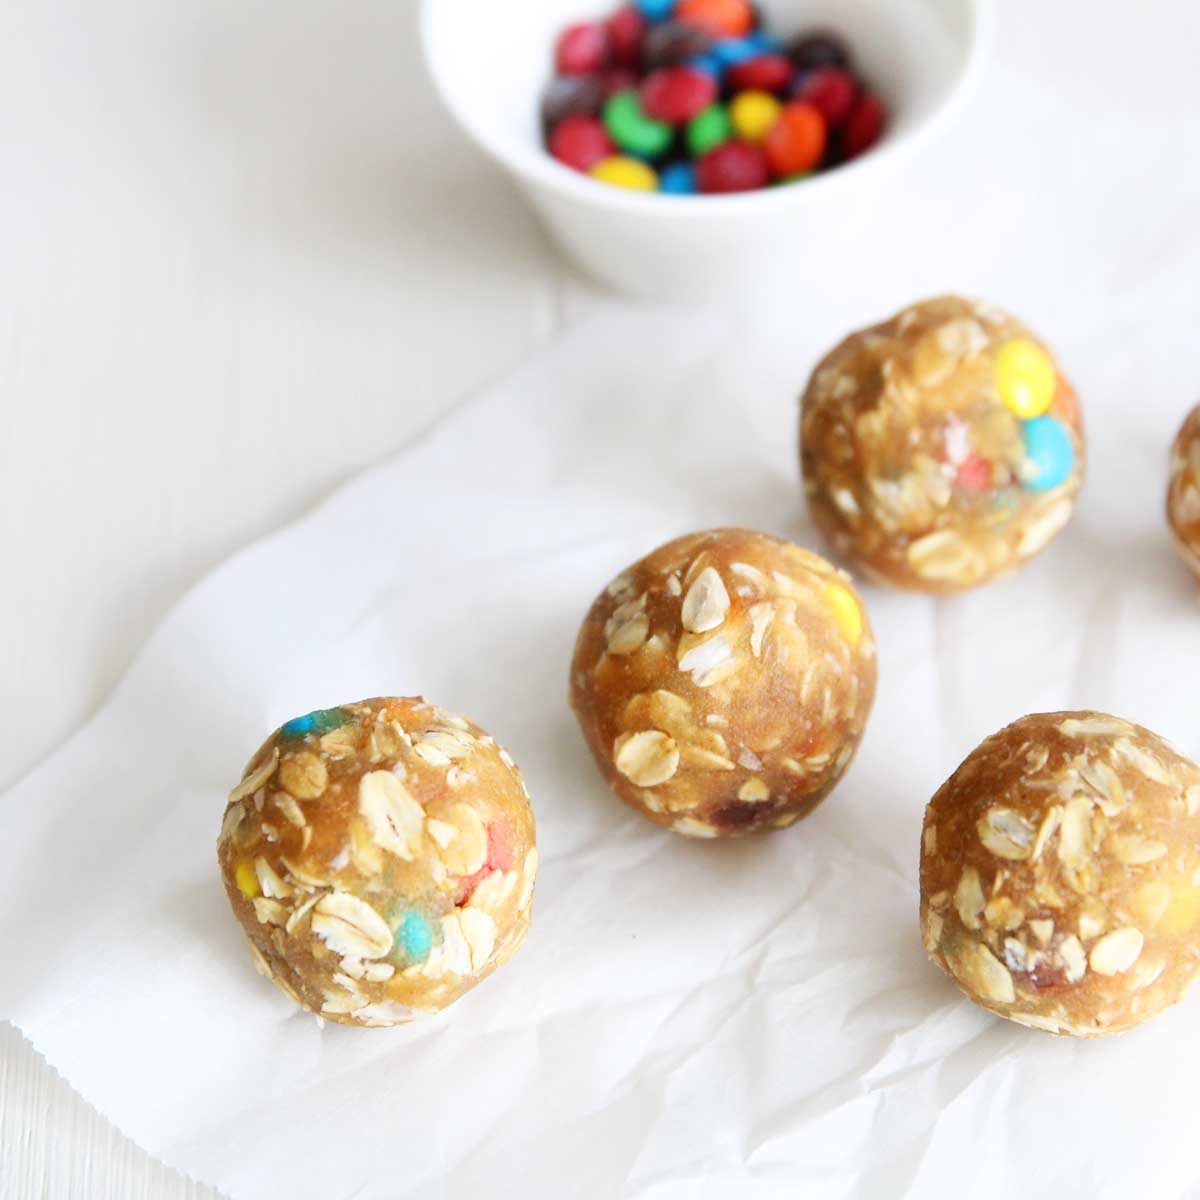 Healthy Monster Cookie Protein Balls Made with Collagen Peptides - Matcha Latte Protein Balls